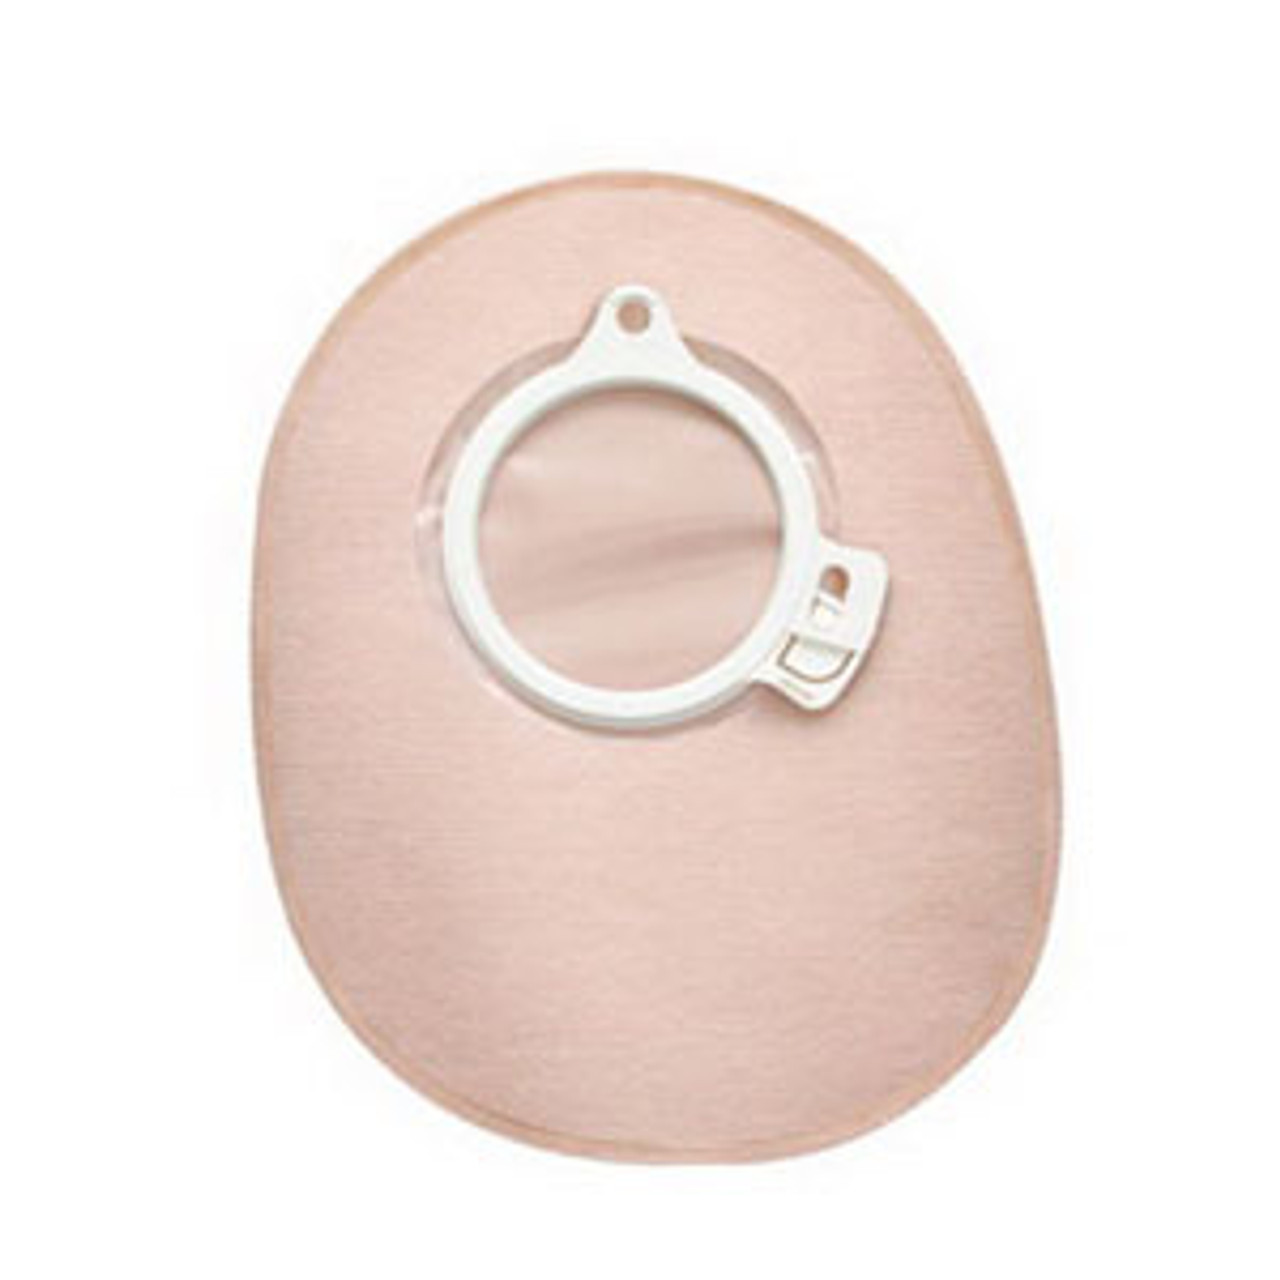 Ostomy Supplies - Ostomy Bags & Accessories